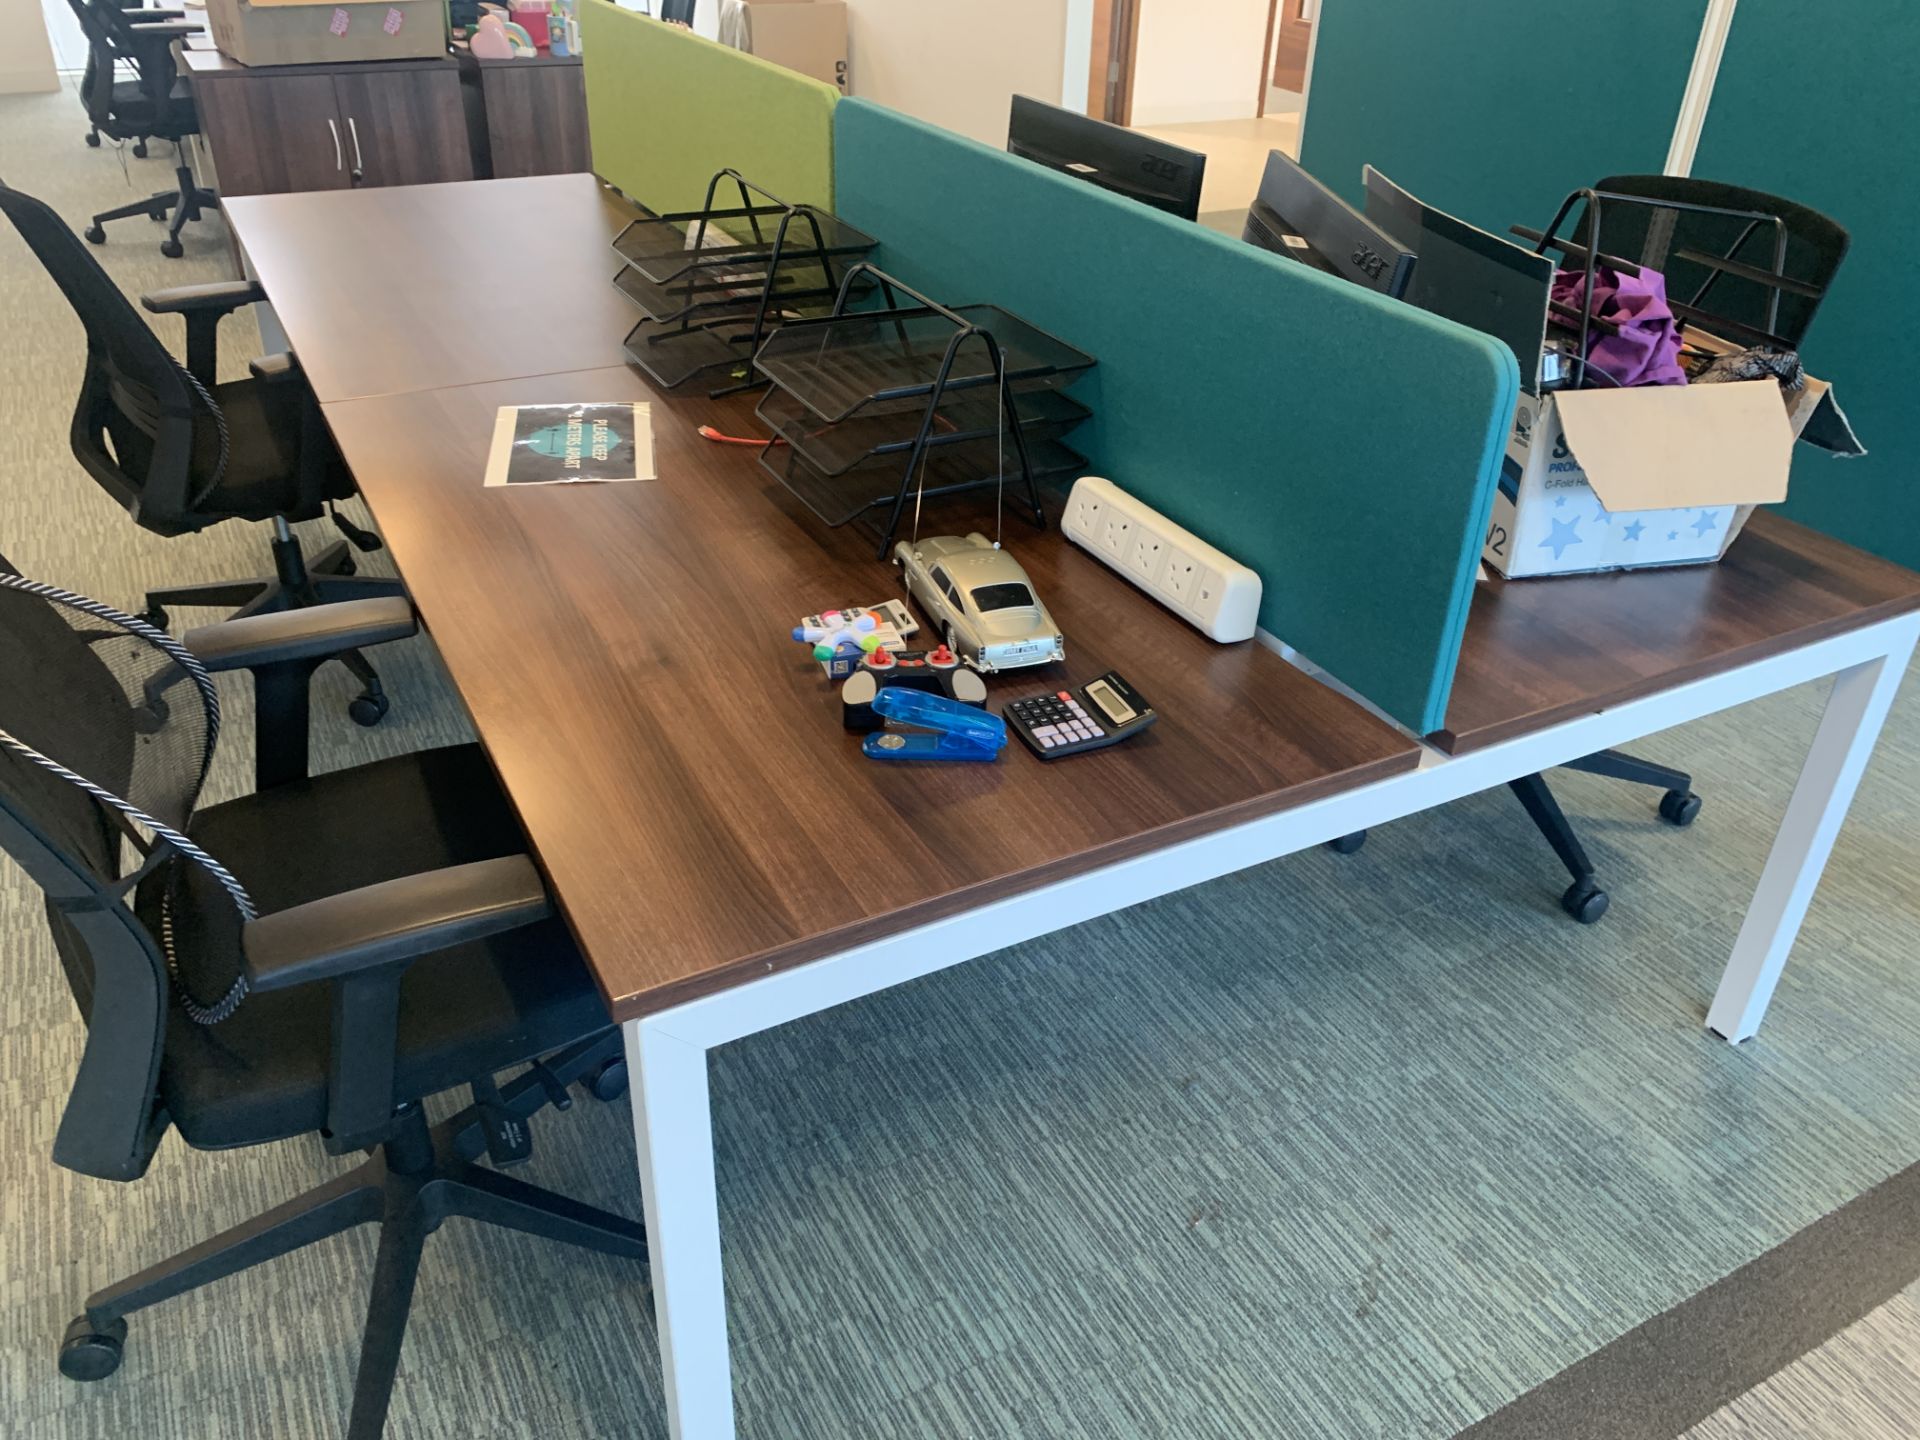 BAY OF 4 HIGH END OFFICE DESKS (CONTENTS NOT INCLUDED)